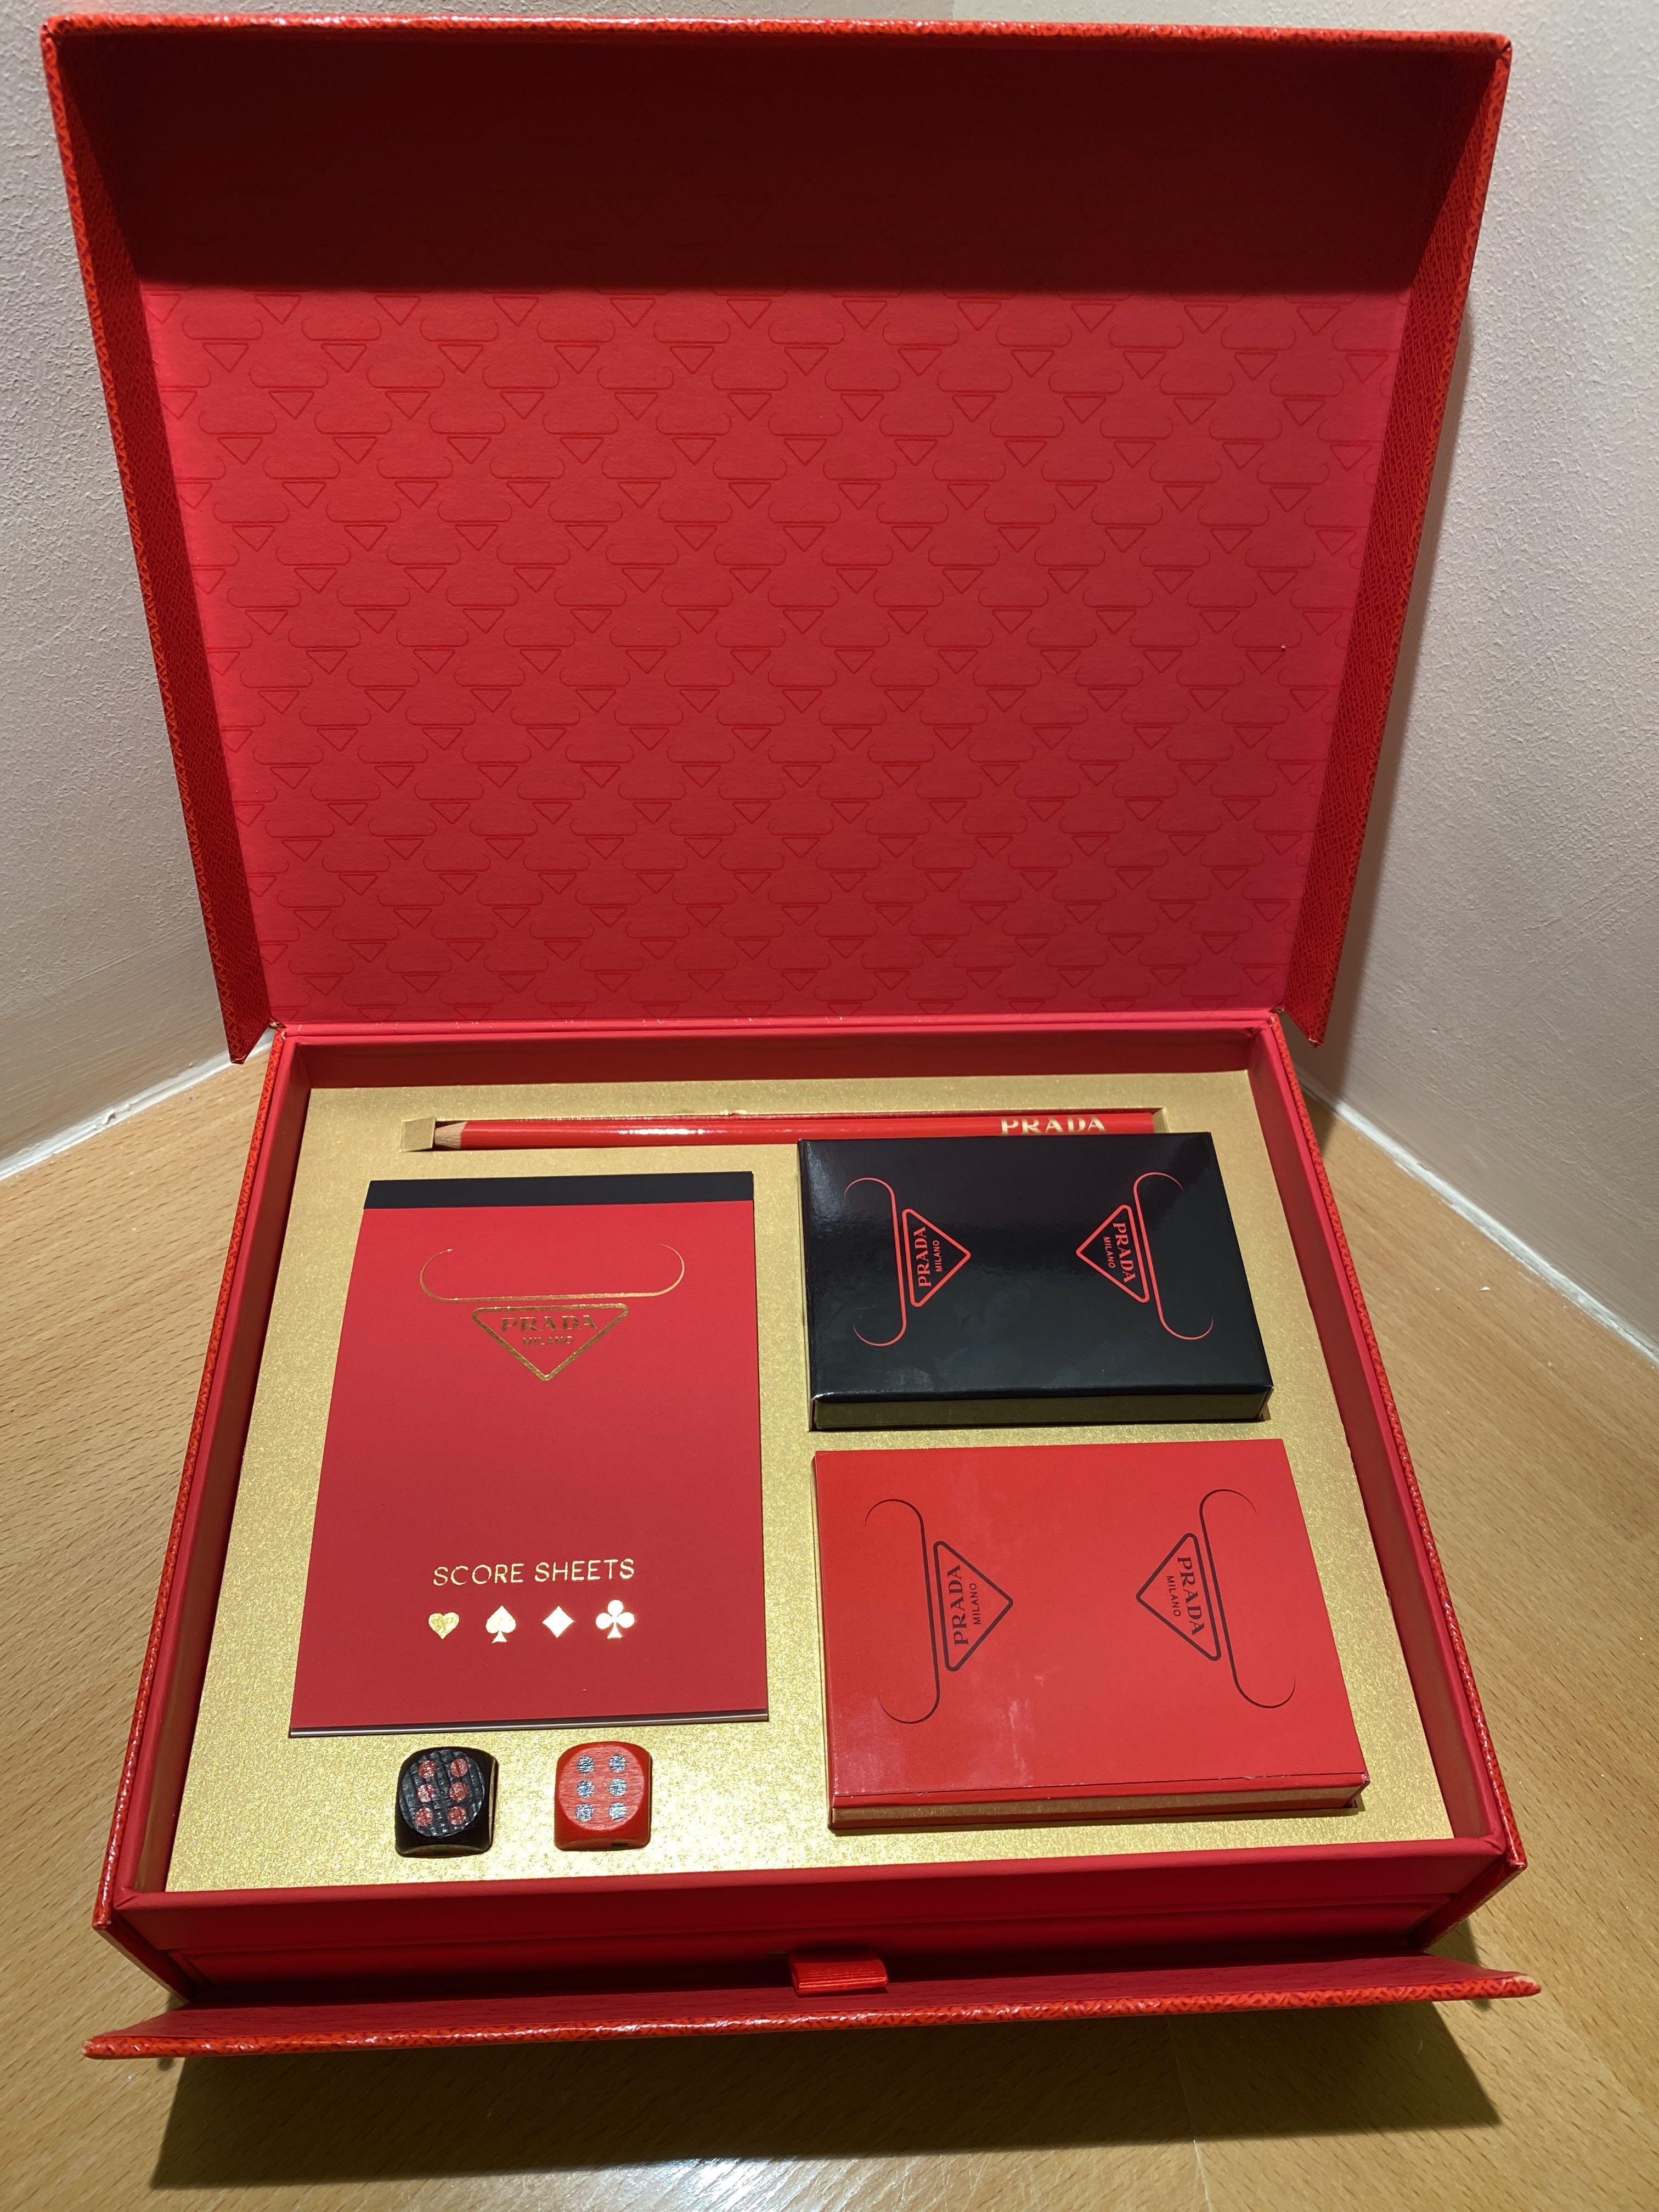 PRADA Year of Ox Playing Cards and Laisee envelops, 興趣及遊戲